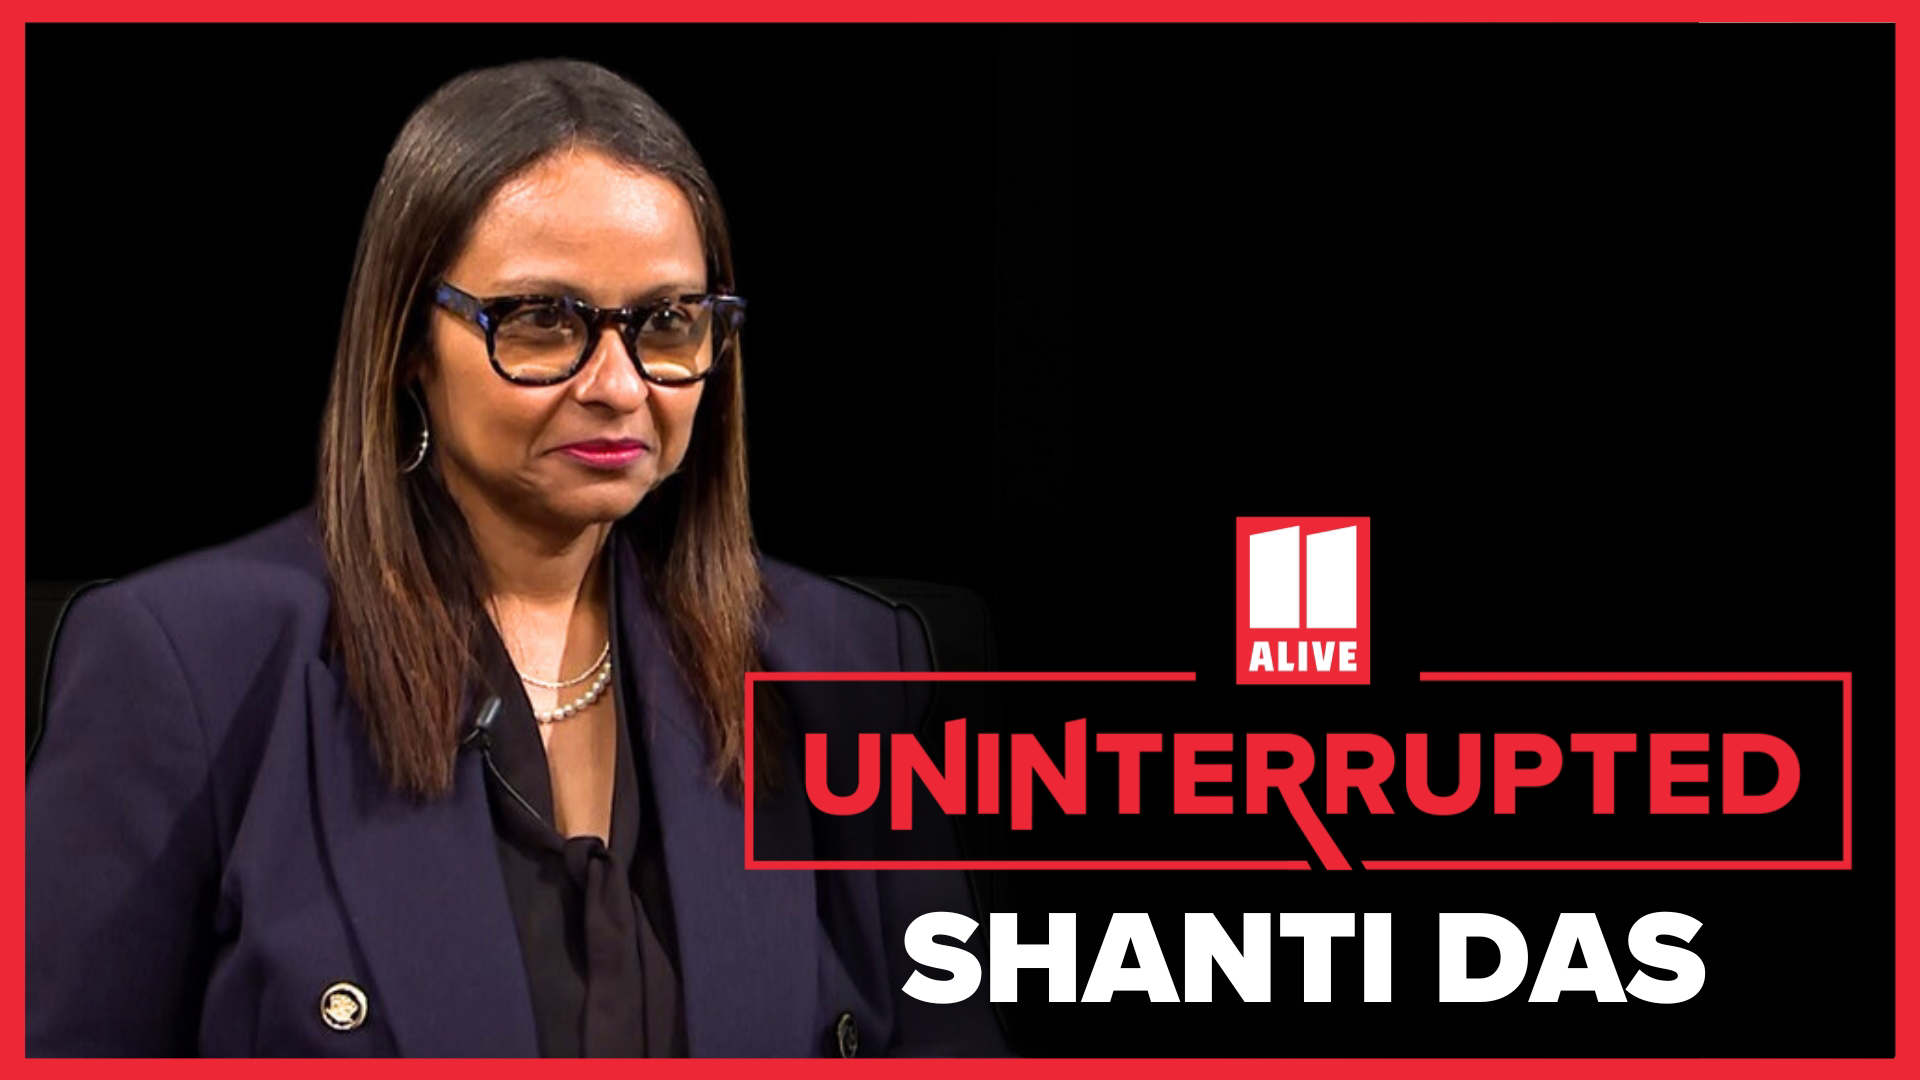 Former music executive Shanti Das worked with some of America's biggest artists. She then walked away from the industry to focus on mental health.